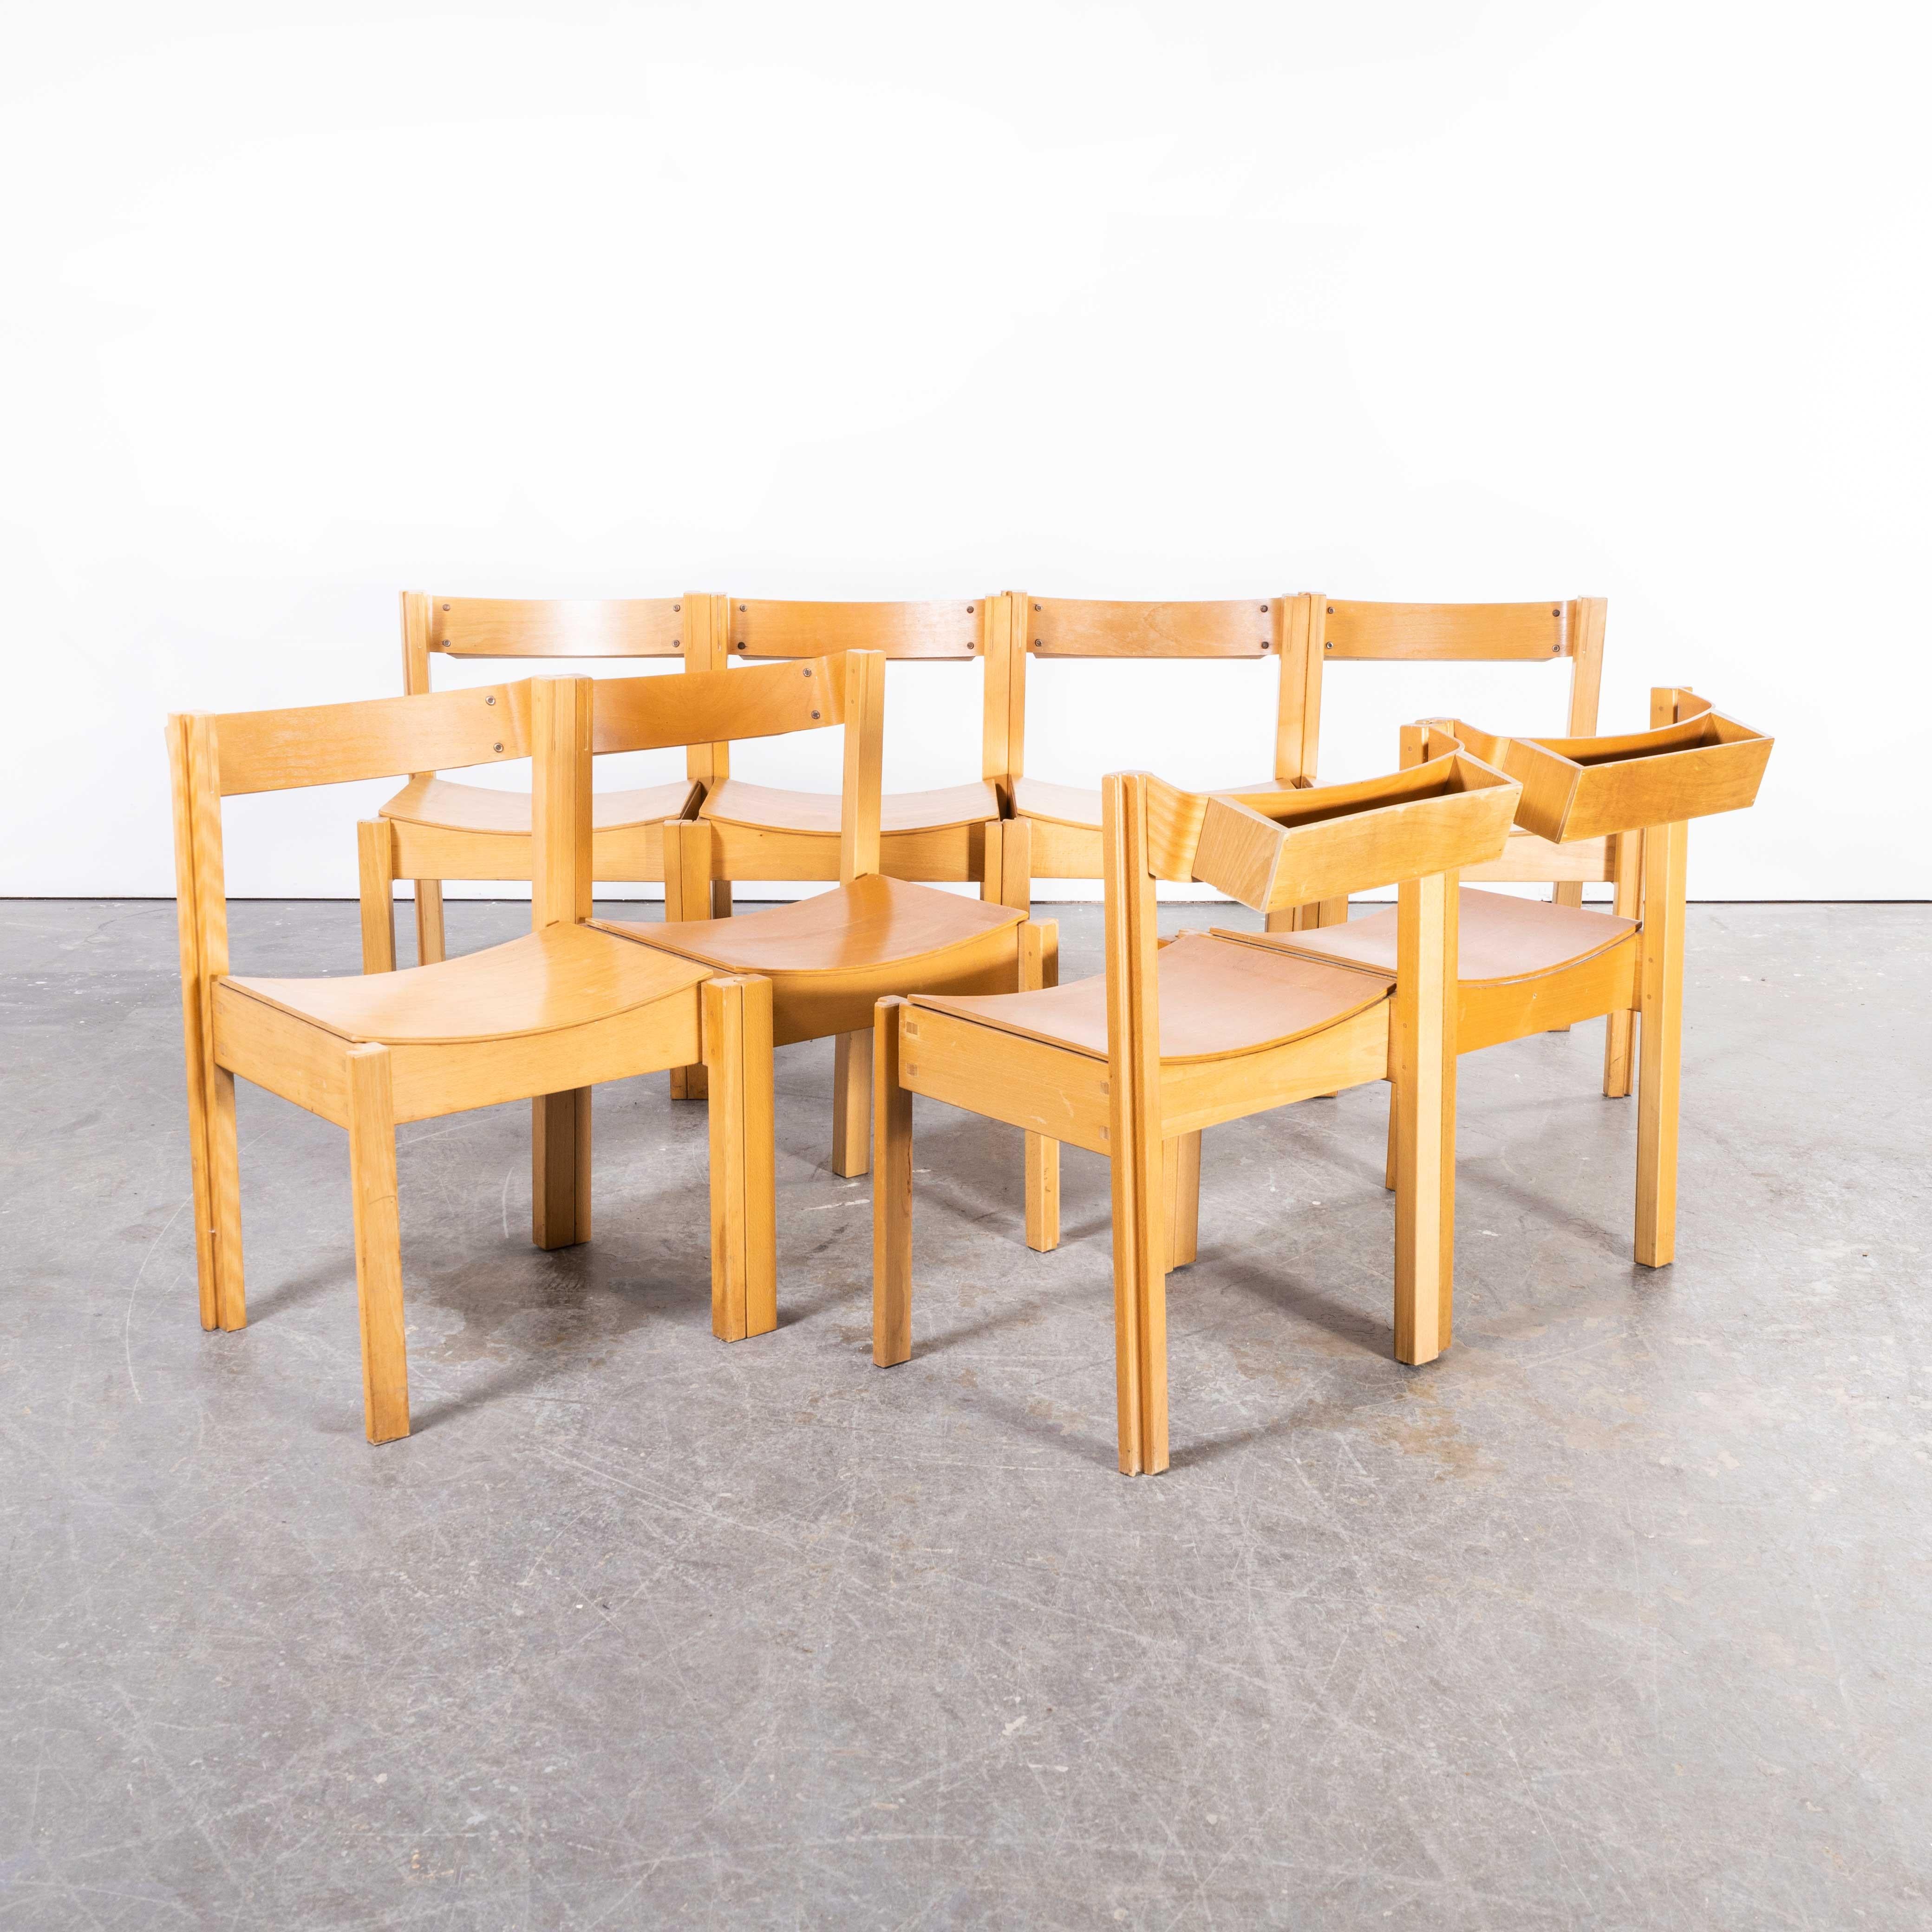 1960’s Linking And Stacking Chairs By Clive Bacon – Set Of Eight
1960’s Linking And Stacking Chairs By Clive Bacon – Set Of Eight. Bacon’s ingenious jigsaw leg design enables the chairs to be connected together to form solid rows and also allows the